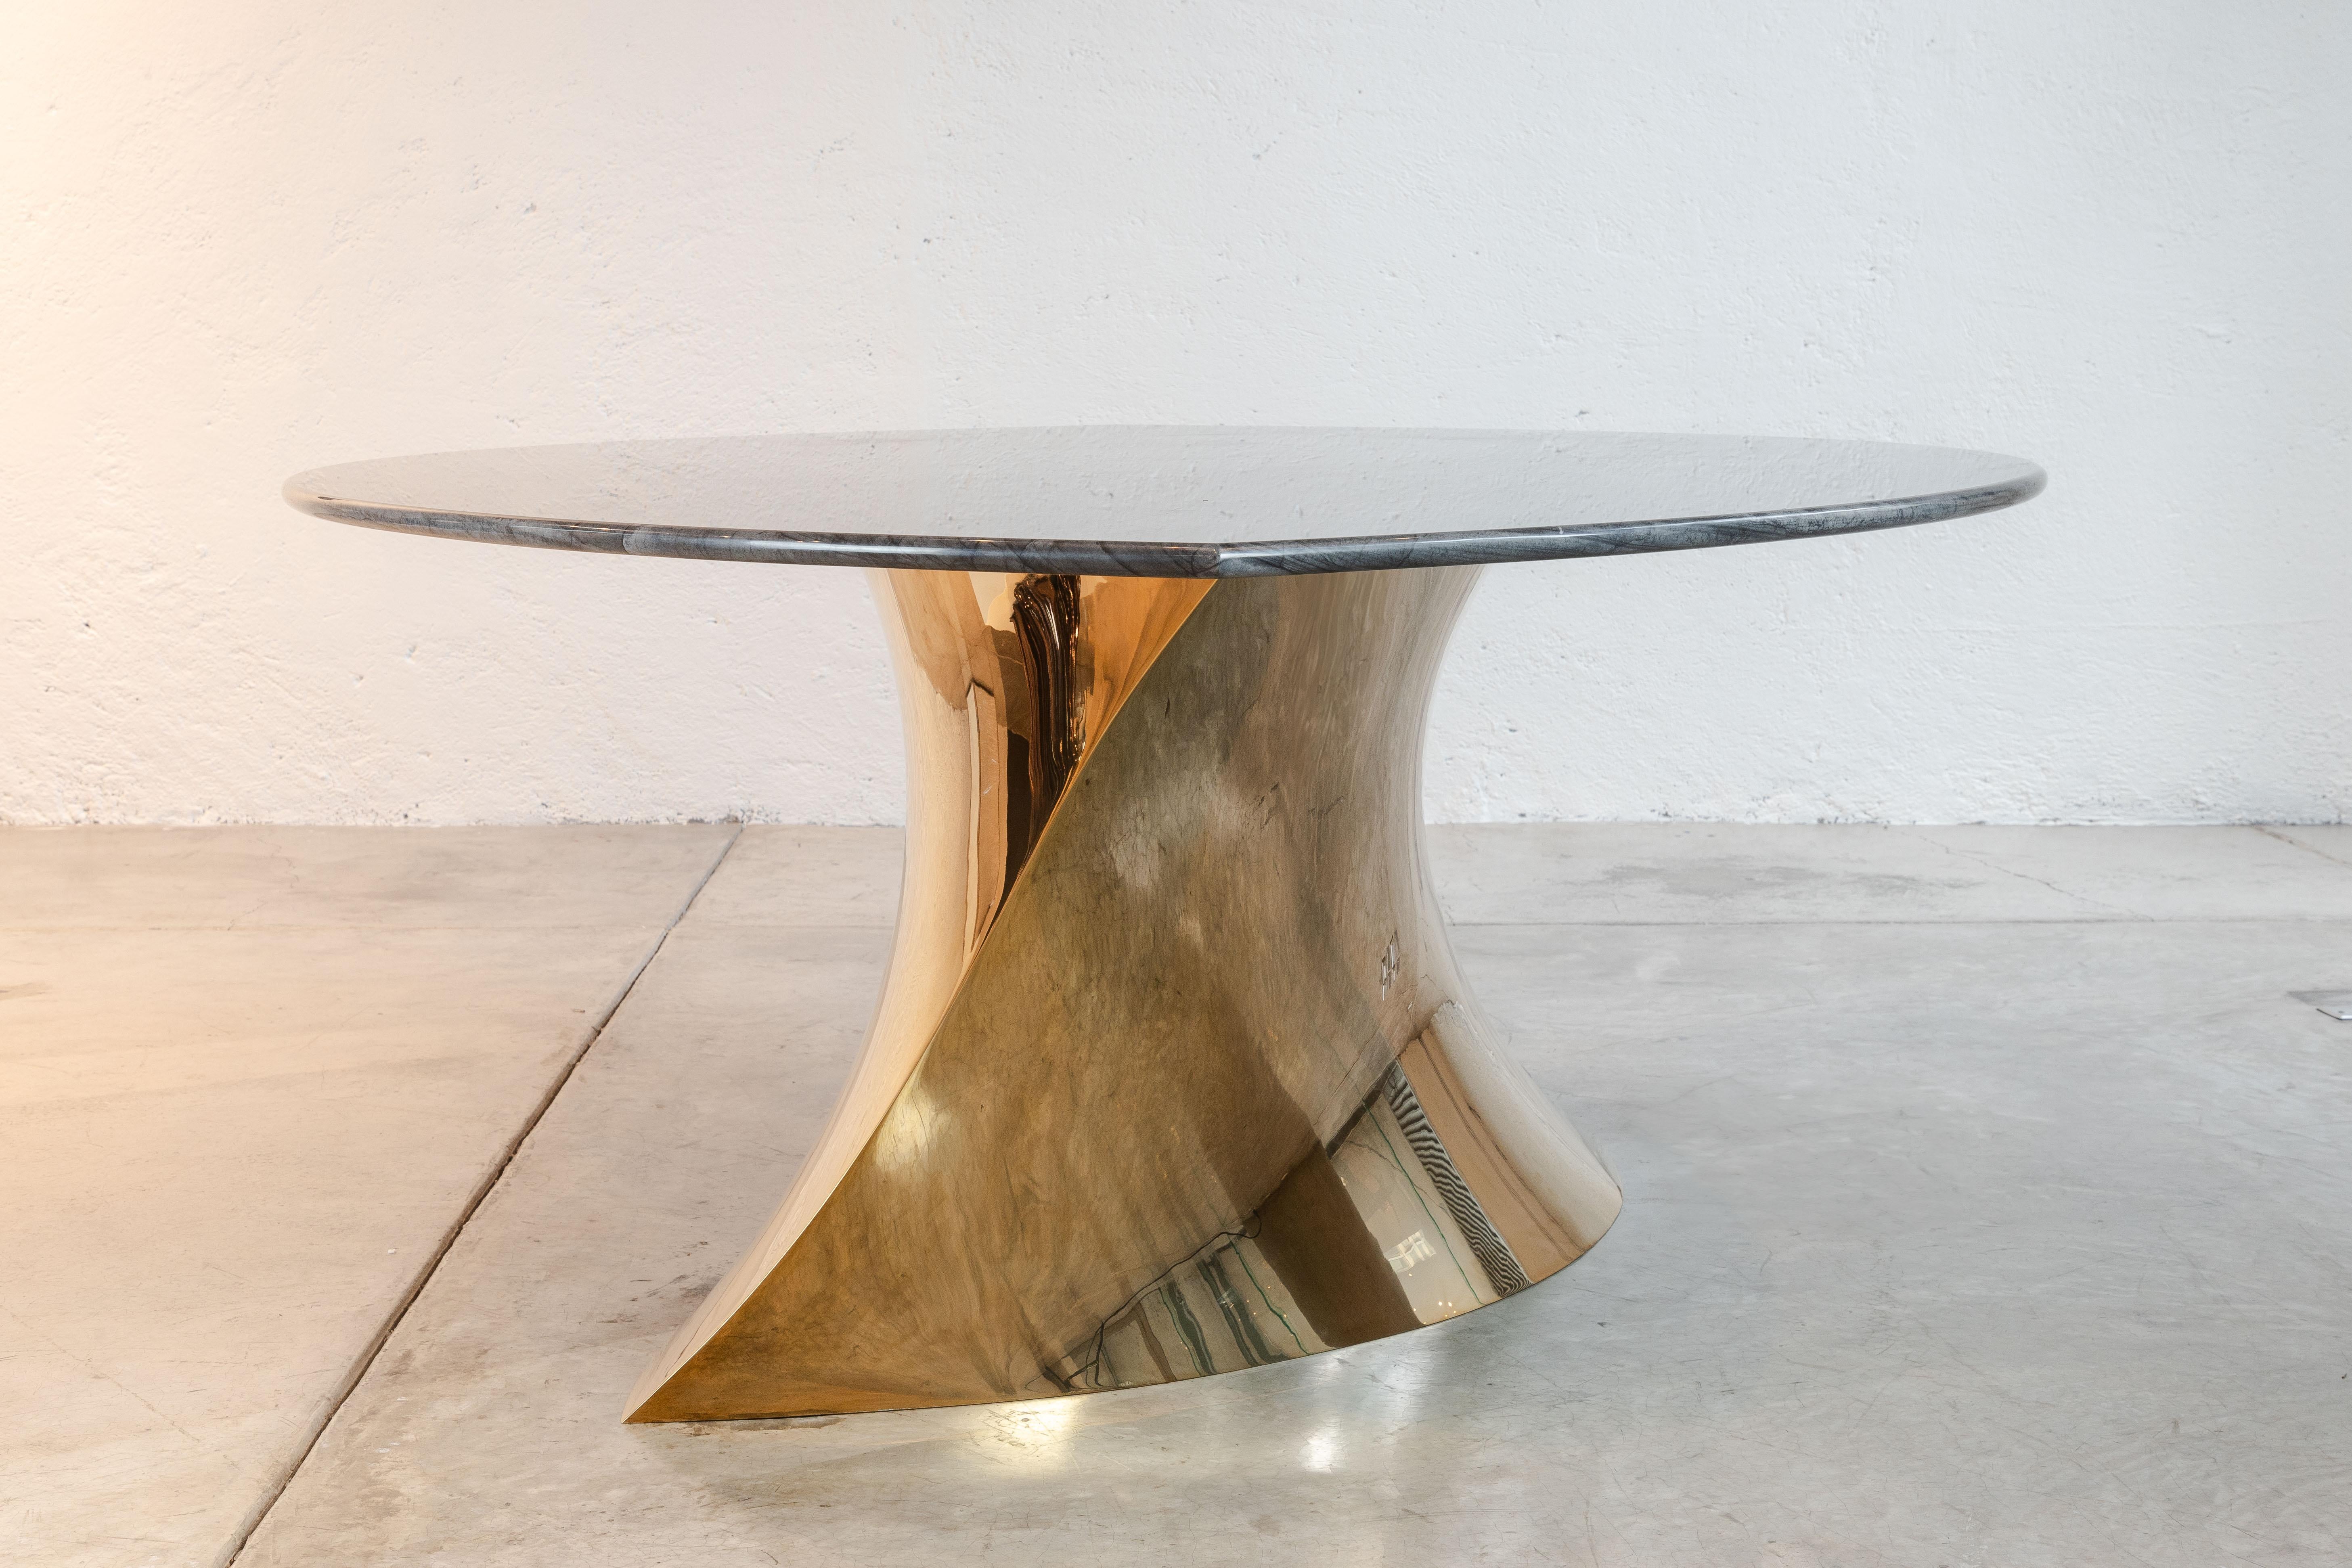 The Geometra Dining Table from Katz Studio stands as a minimalist statement, combining the reflective elegance of a polished bronze base with the robust beauty of Adamantium Granite. Its geometric form and mirror-like finish capture a modernist